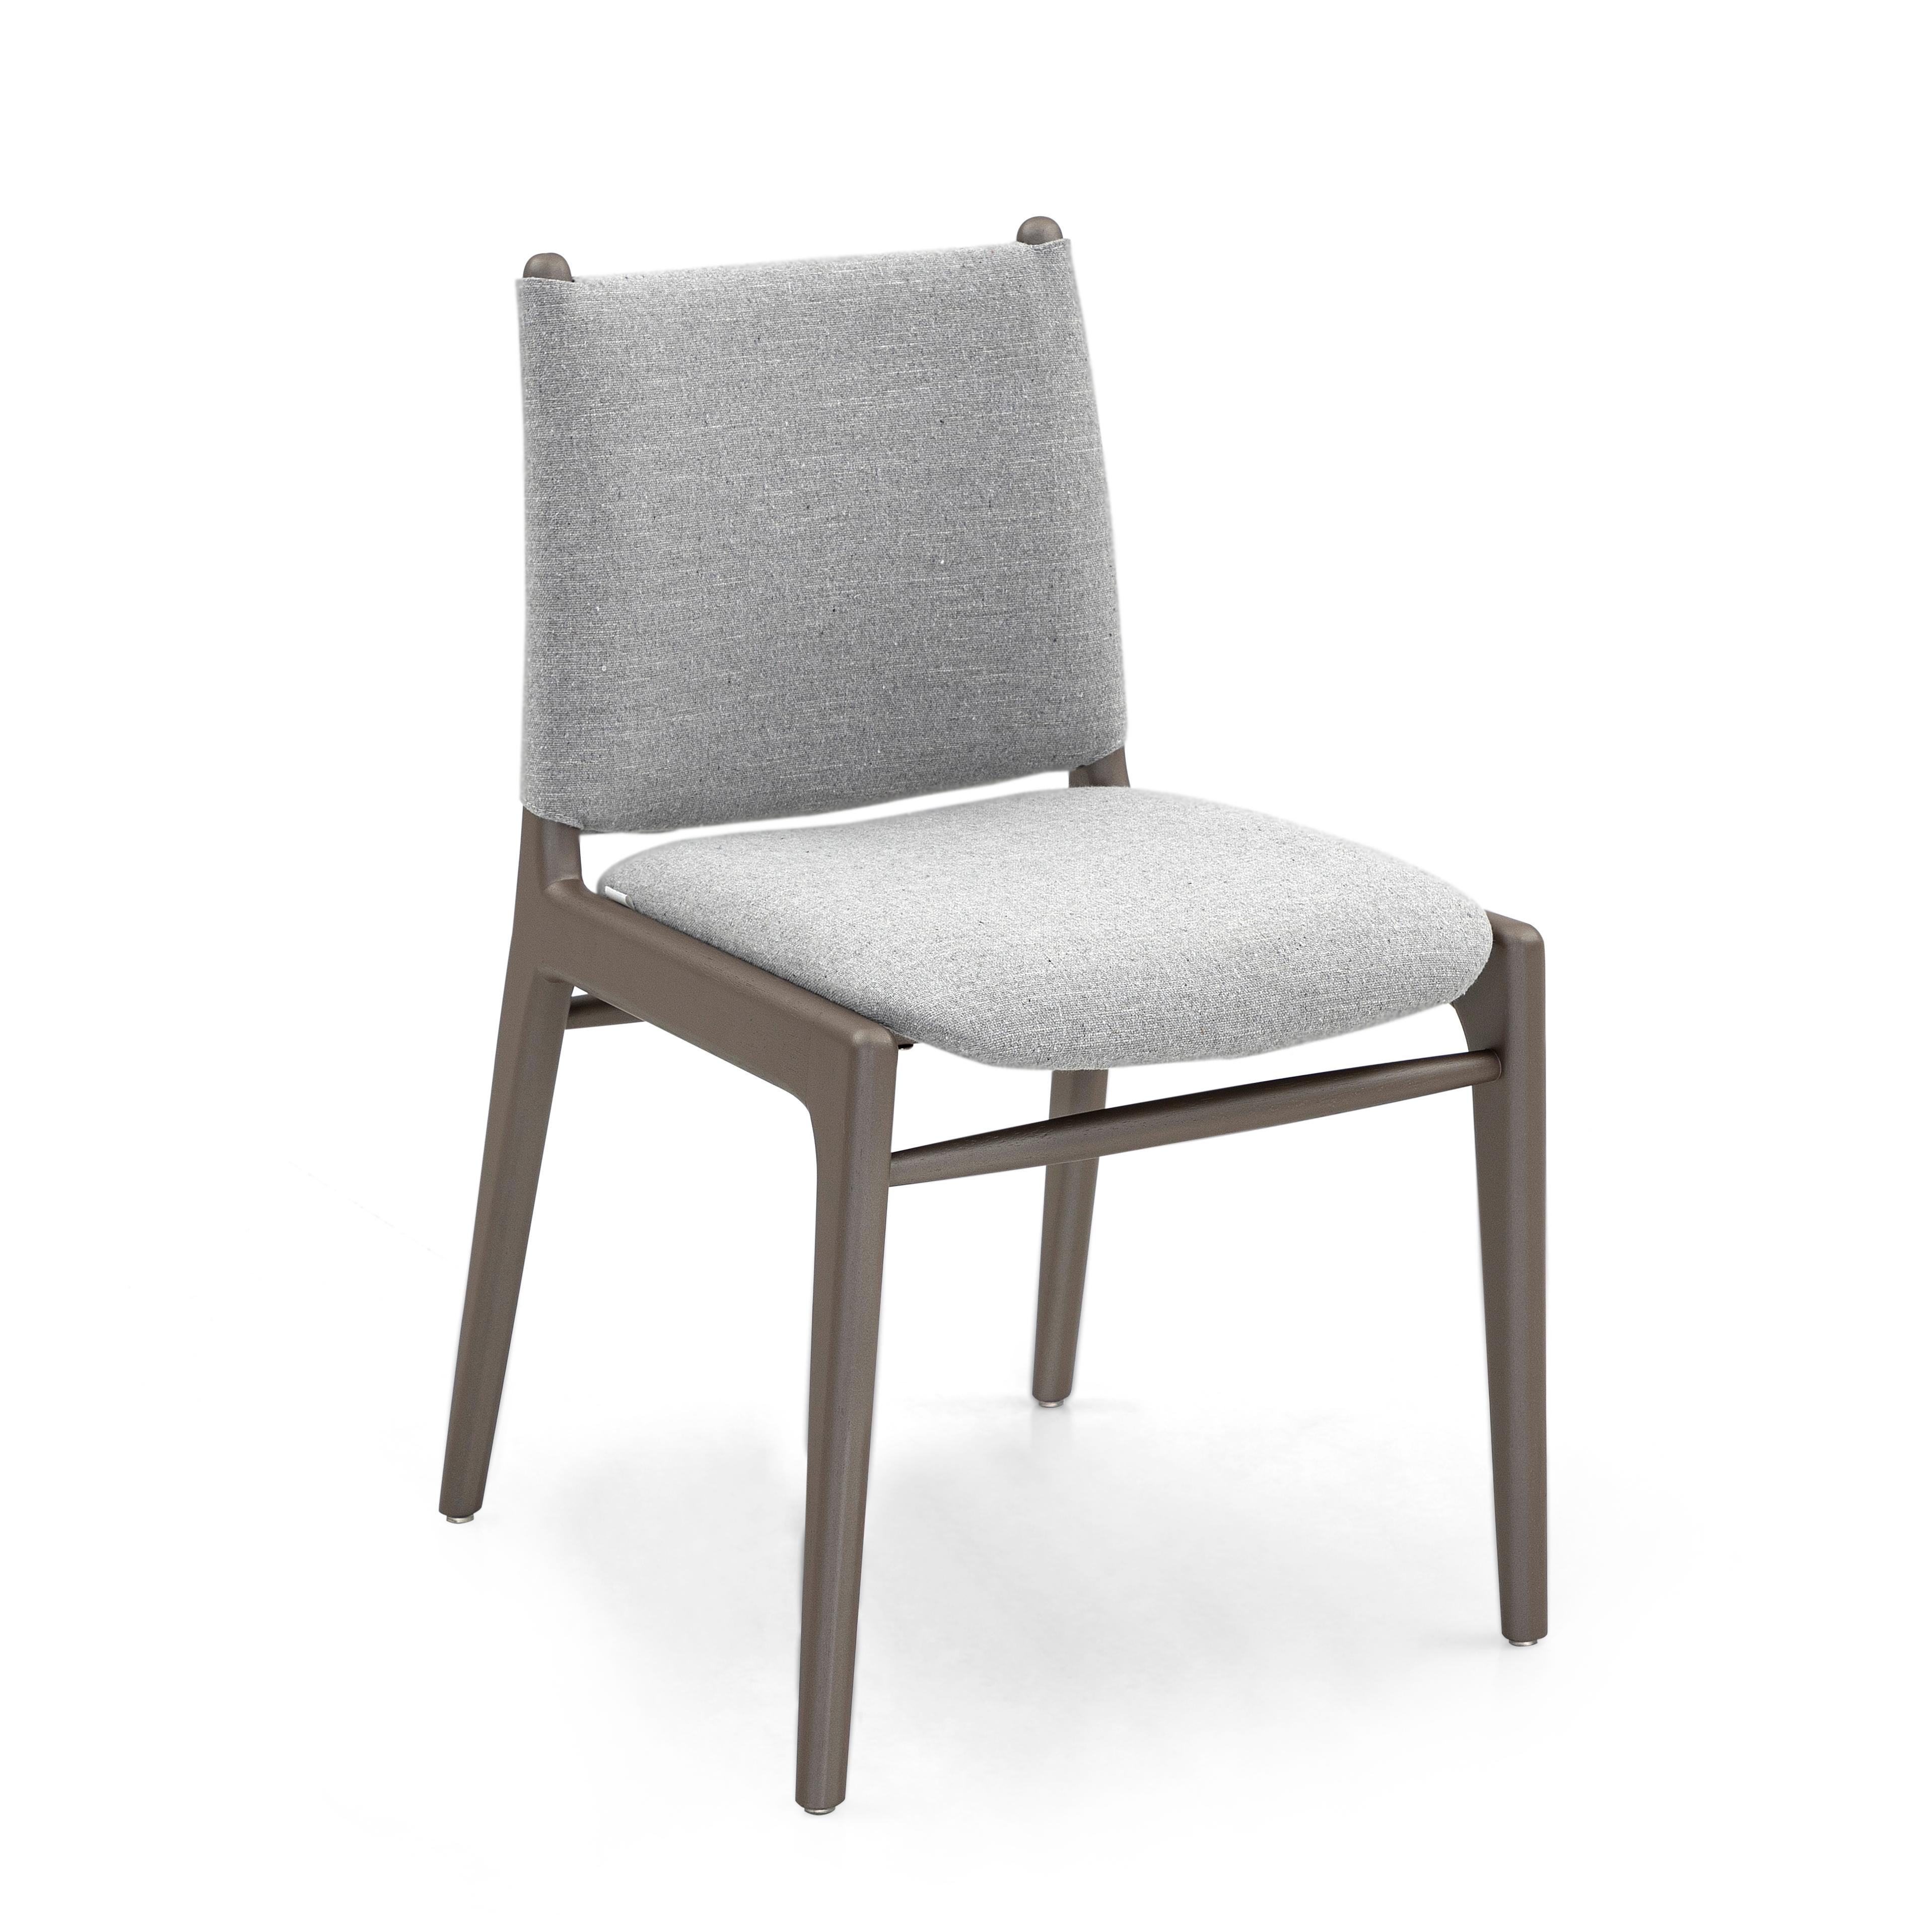 Brazilian Cappio Dining Chair in Chocolate Wood Color with Gray Fabric, set of 2 For Sale